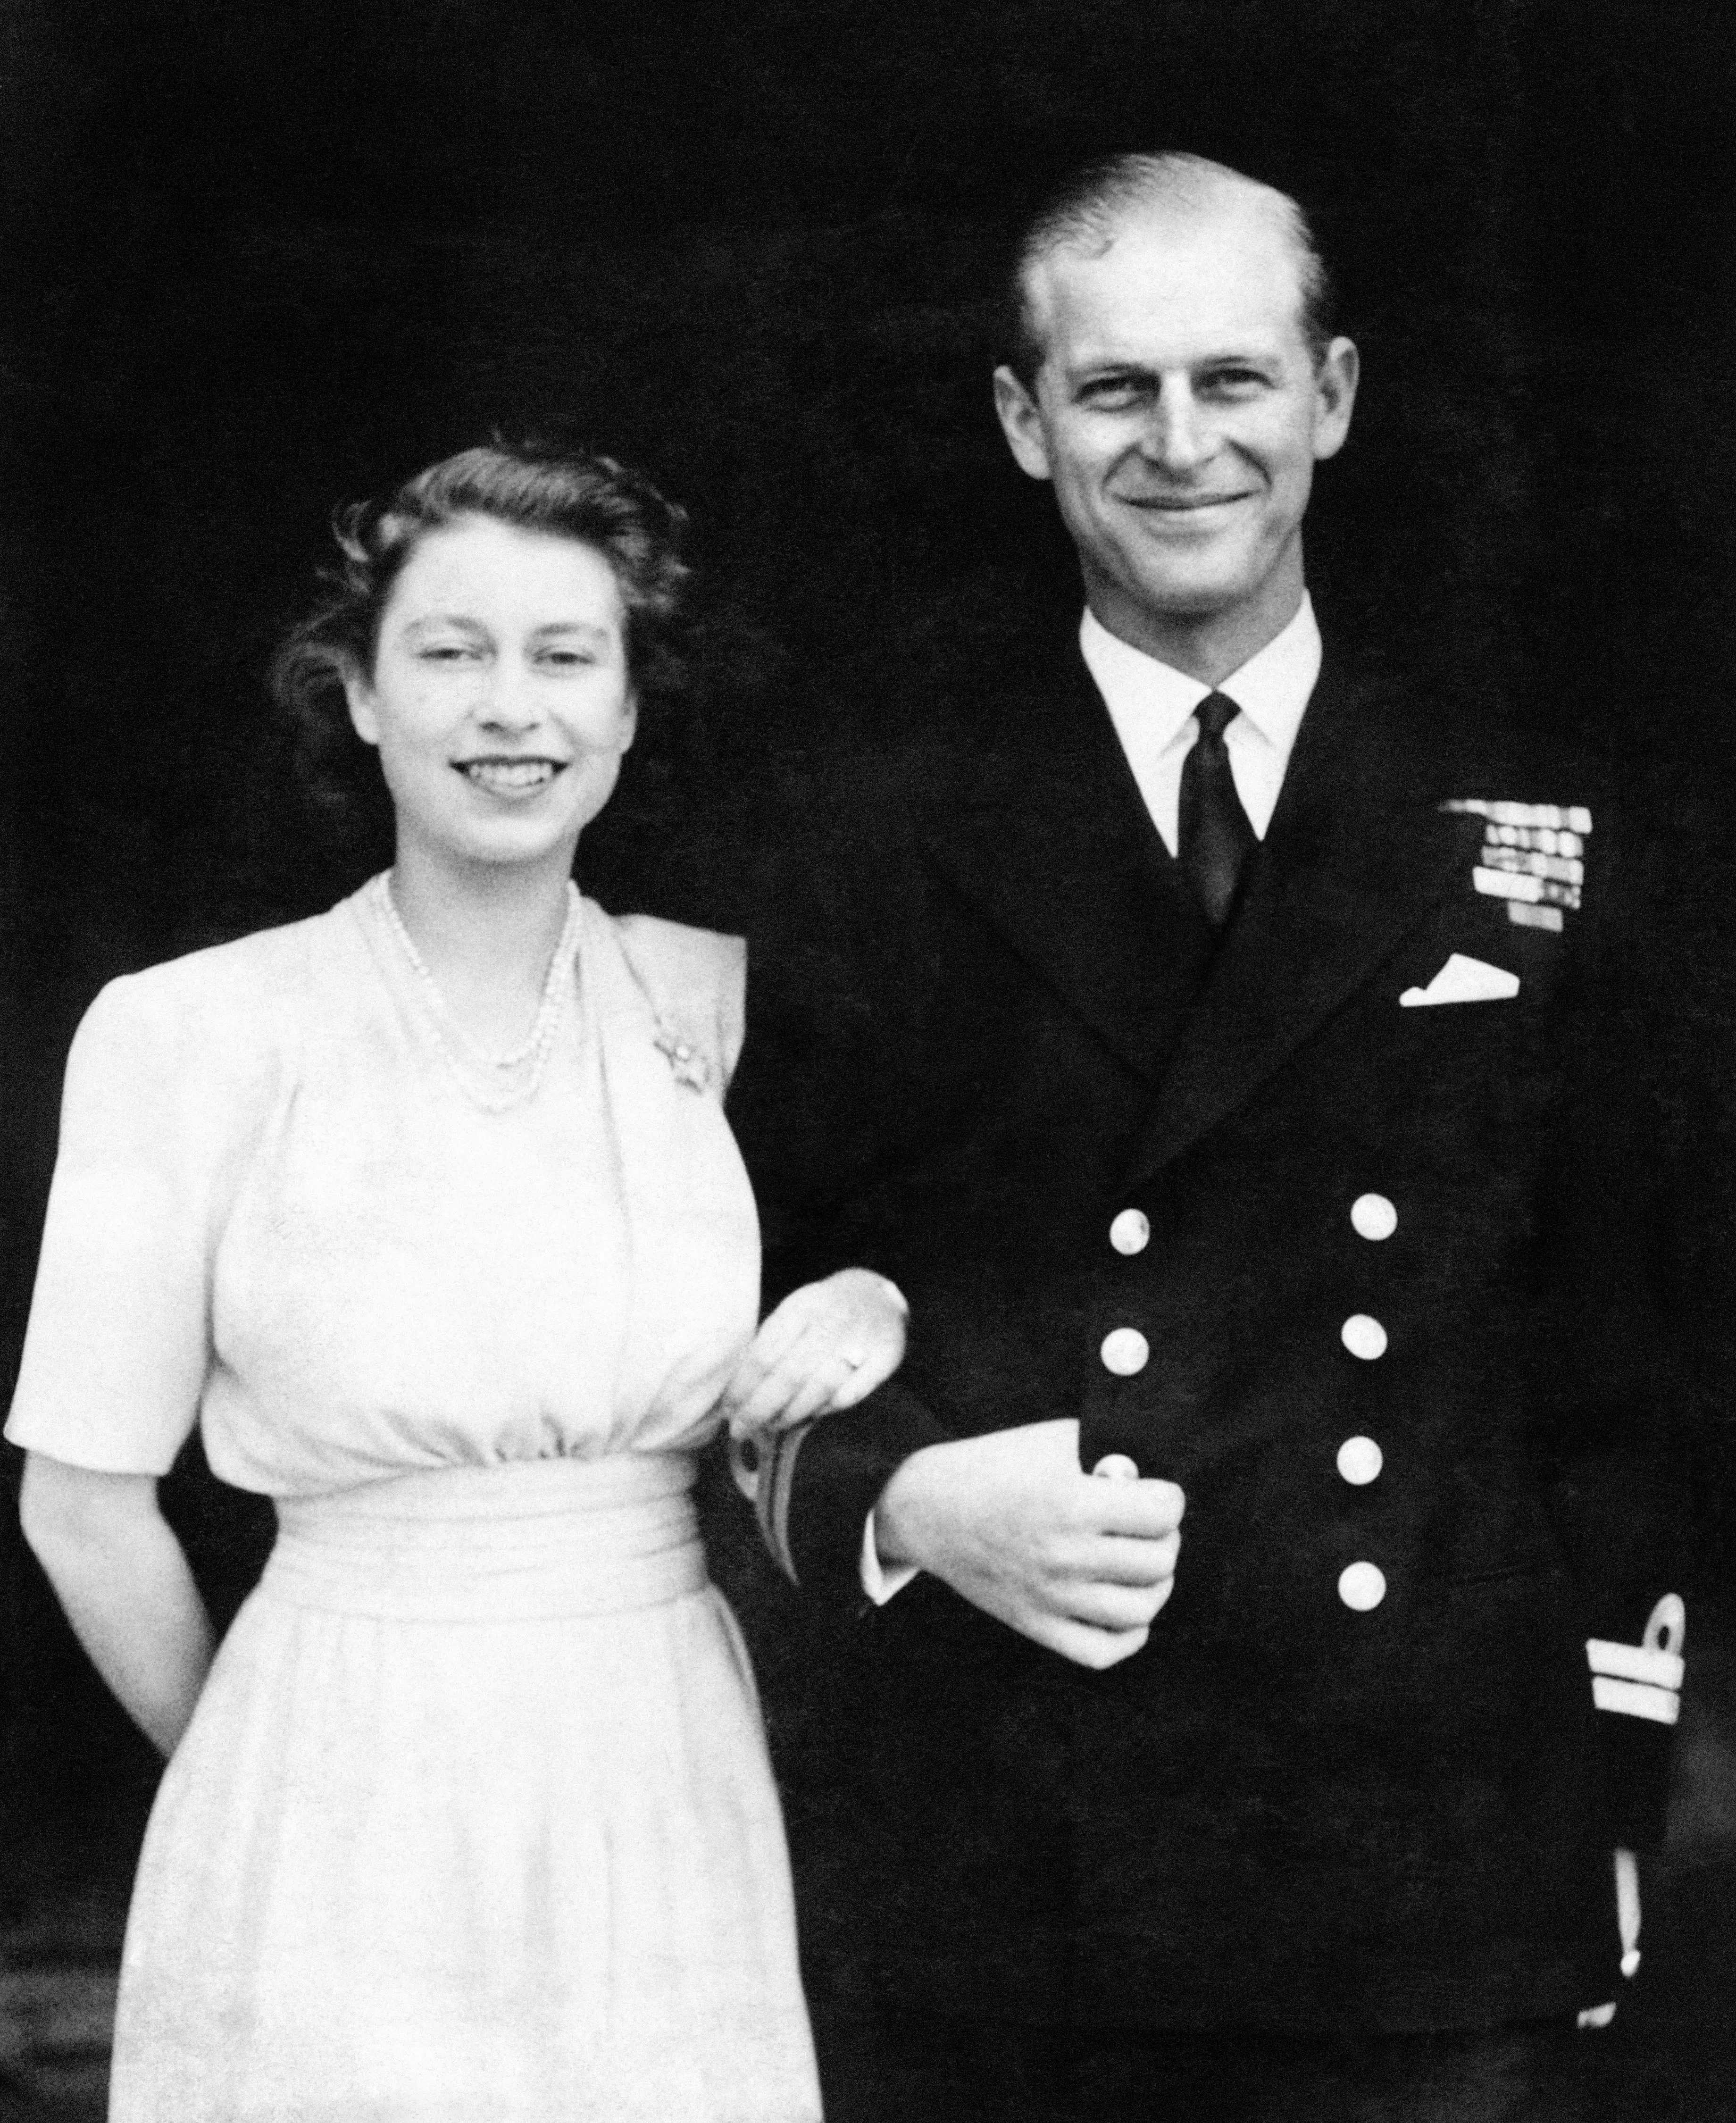 The Queen and Prince Phillip were married in November 1947 (